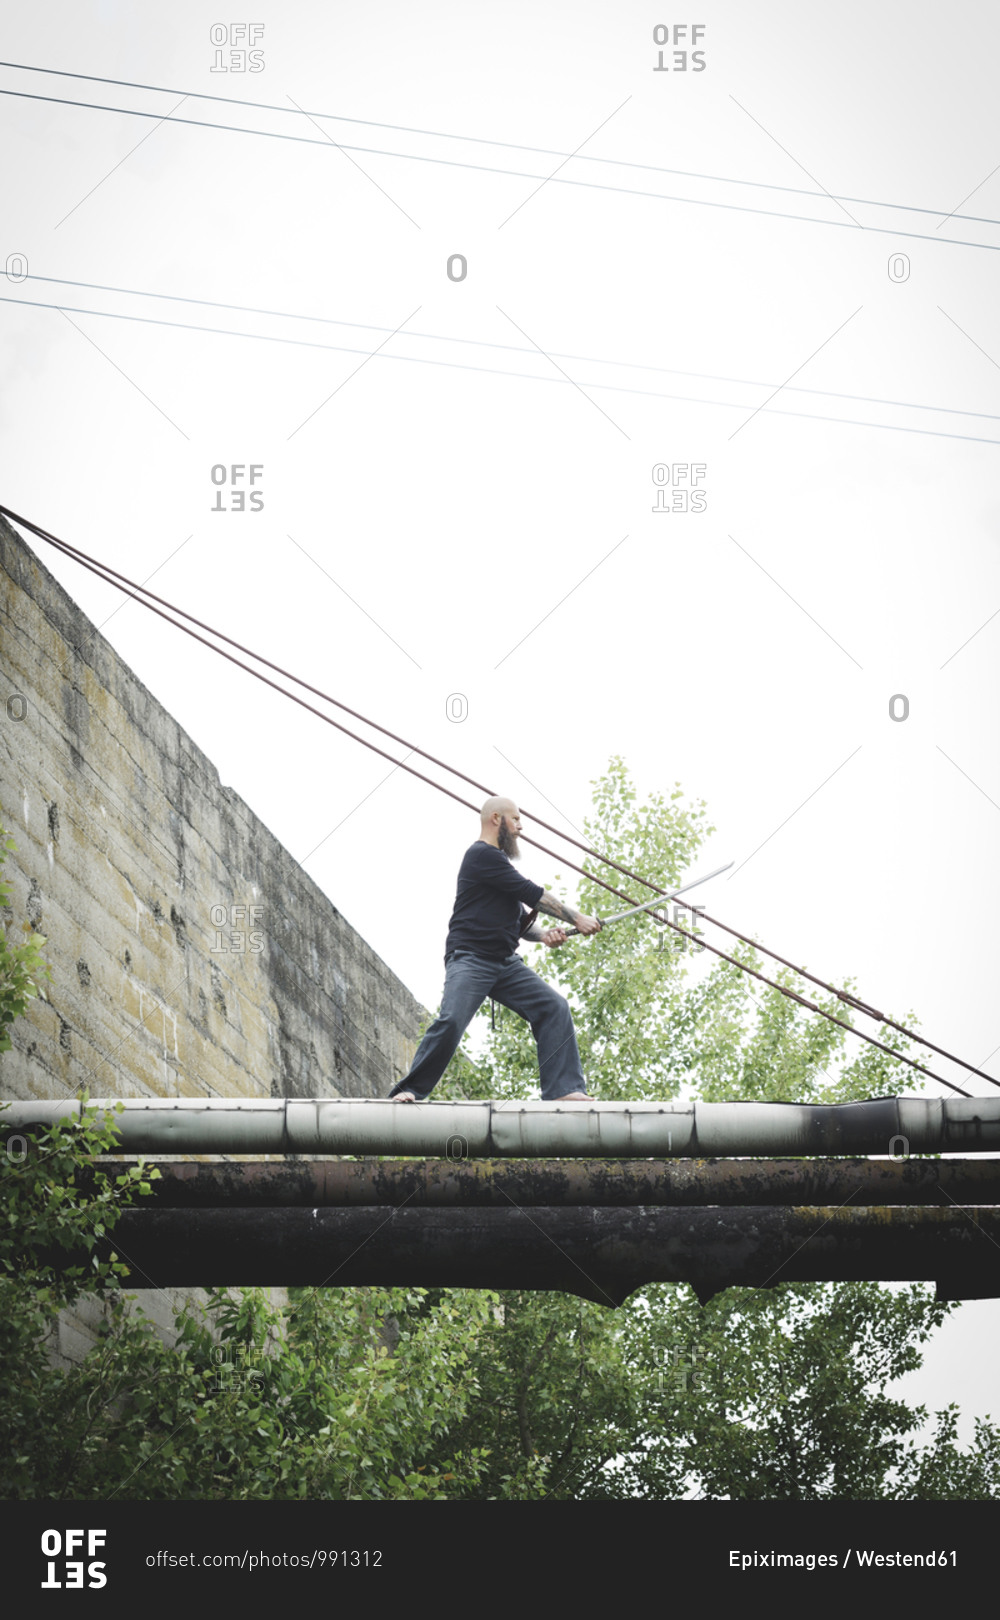 Mature man holding sword posing while standing on old pipes against clear sky